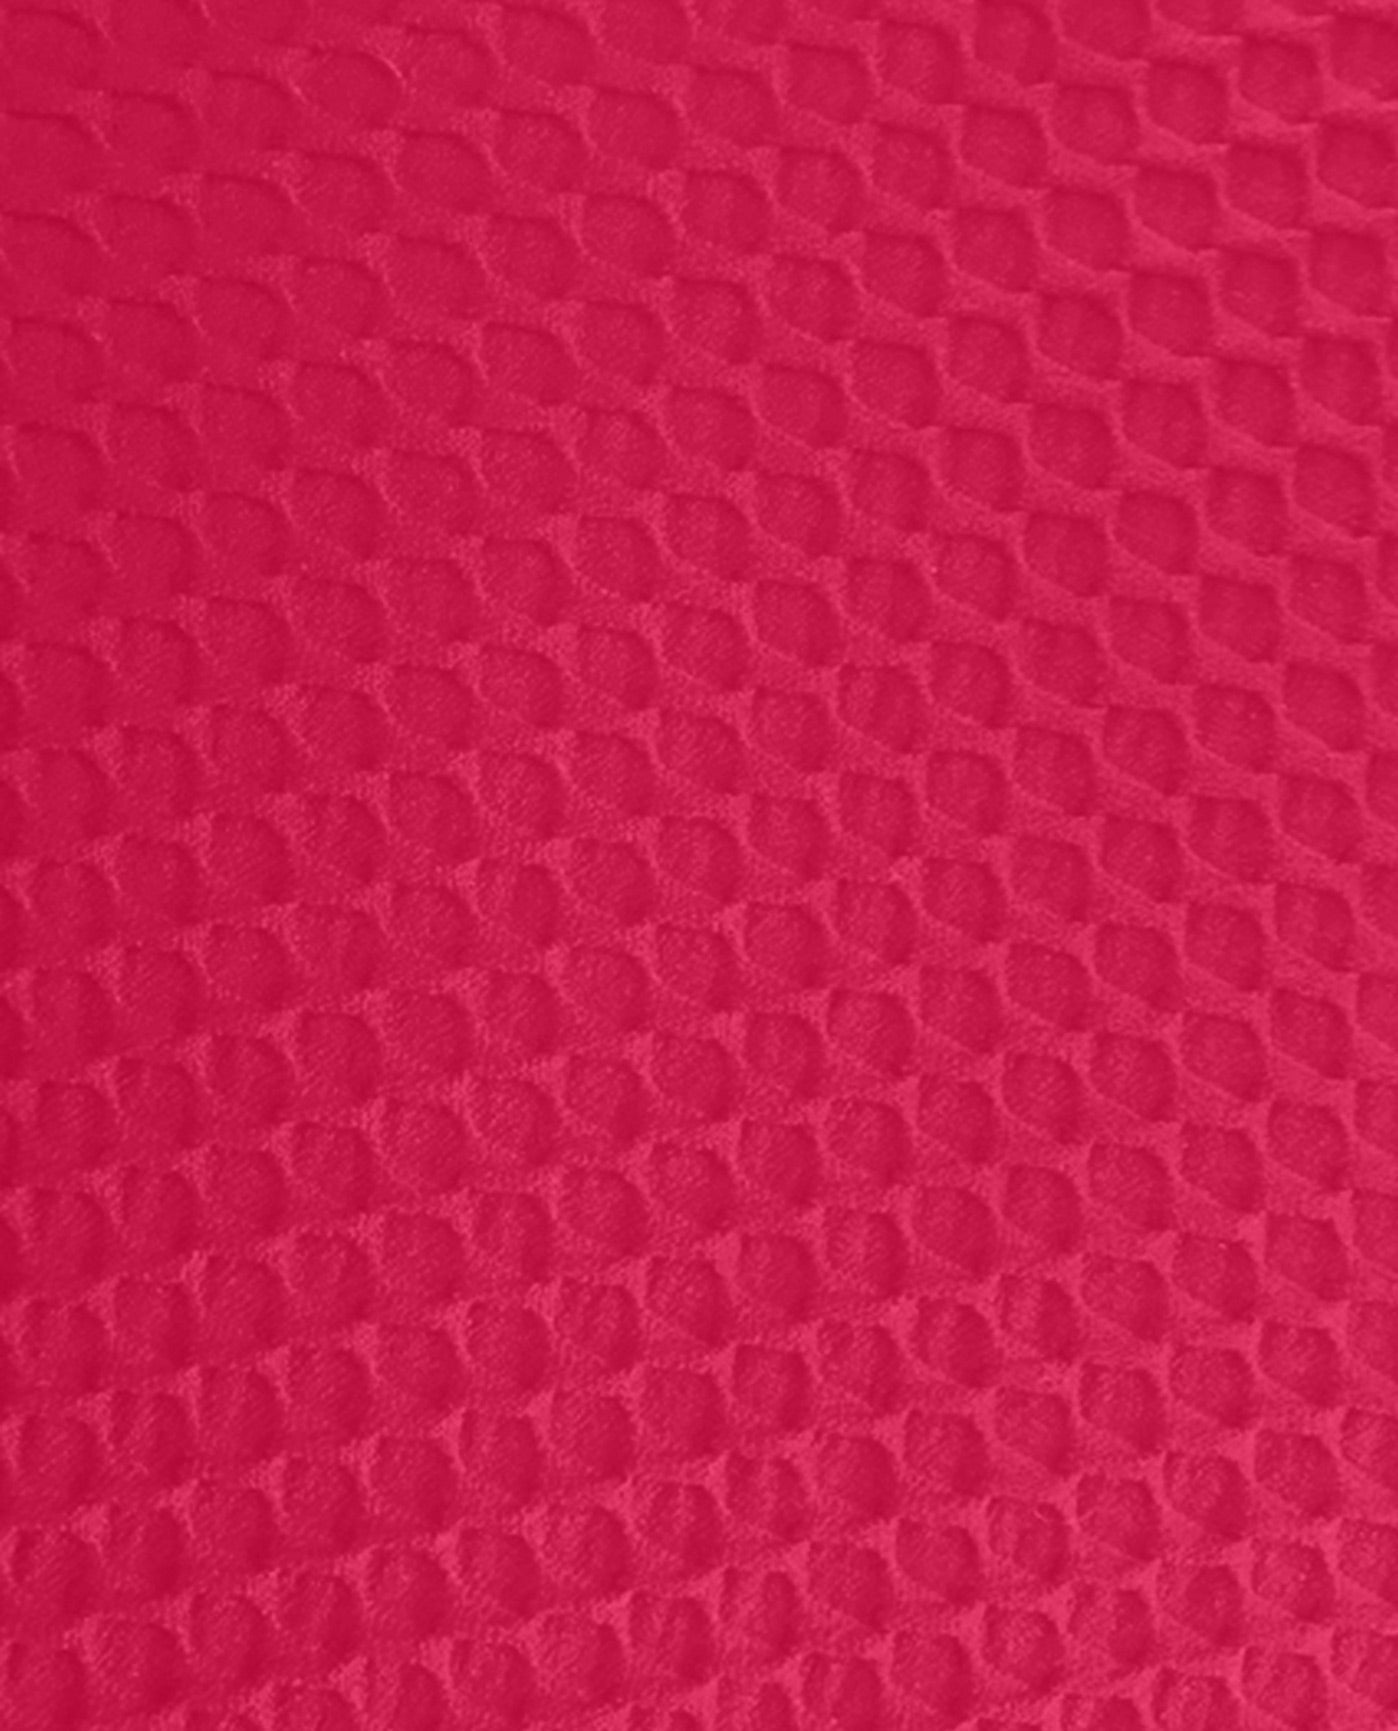 FABRIC SWATCH VIEW OF CHLORINE RESISTANT AQUAMORE COLOR BLOCK TEXTURED HIGH NECK ONE PIECE SWIMSUIT | 611 AQT TEXTURED RASPBERRY